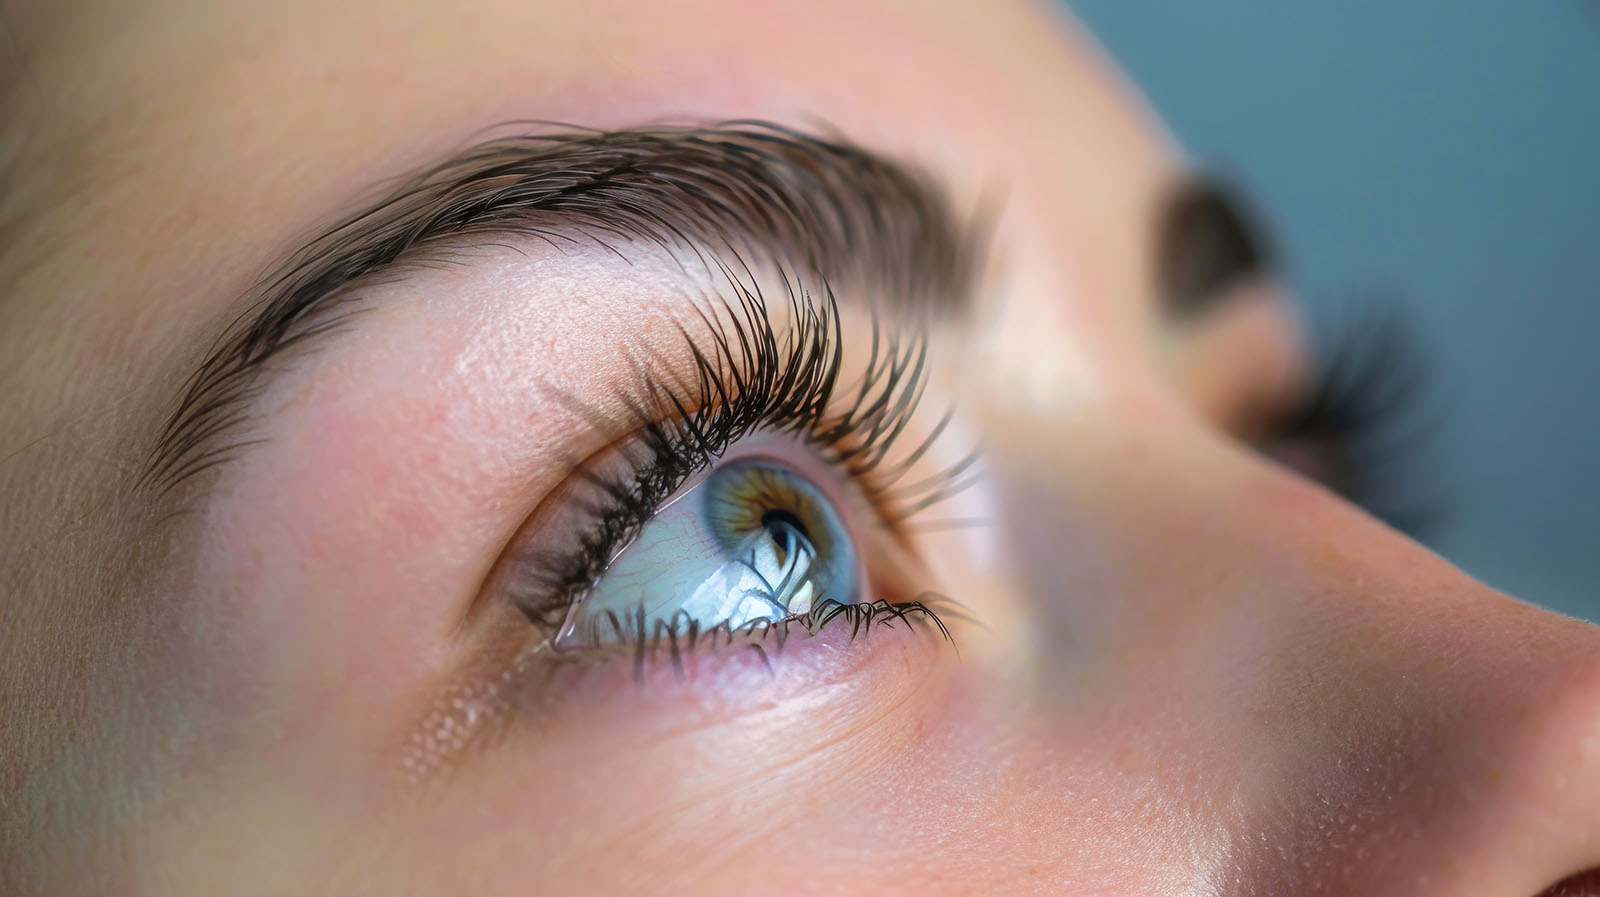 A detailed view of a womans eye showcasing long eyelashes created with eyelash extensions and makeup in a beauty salon.